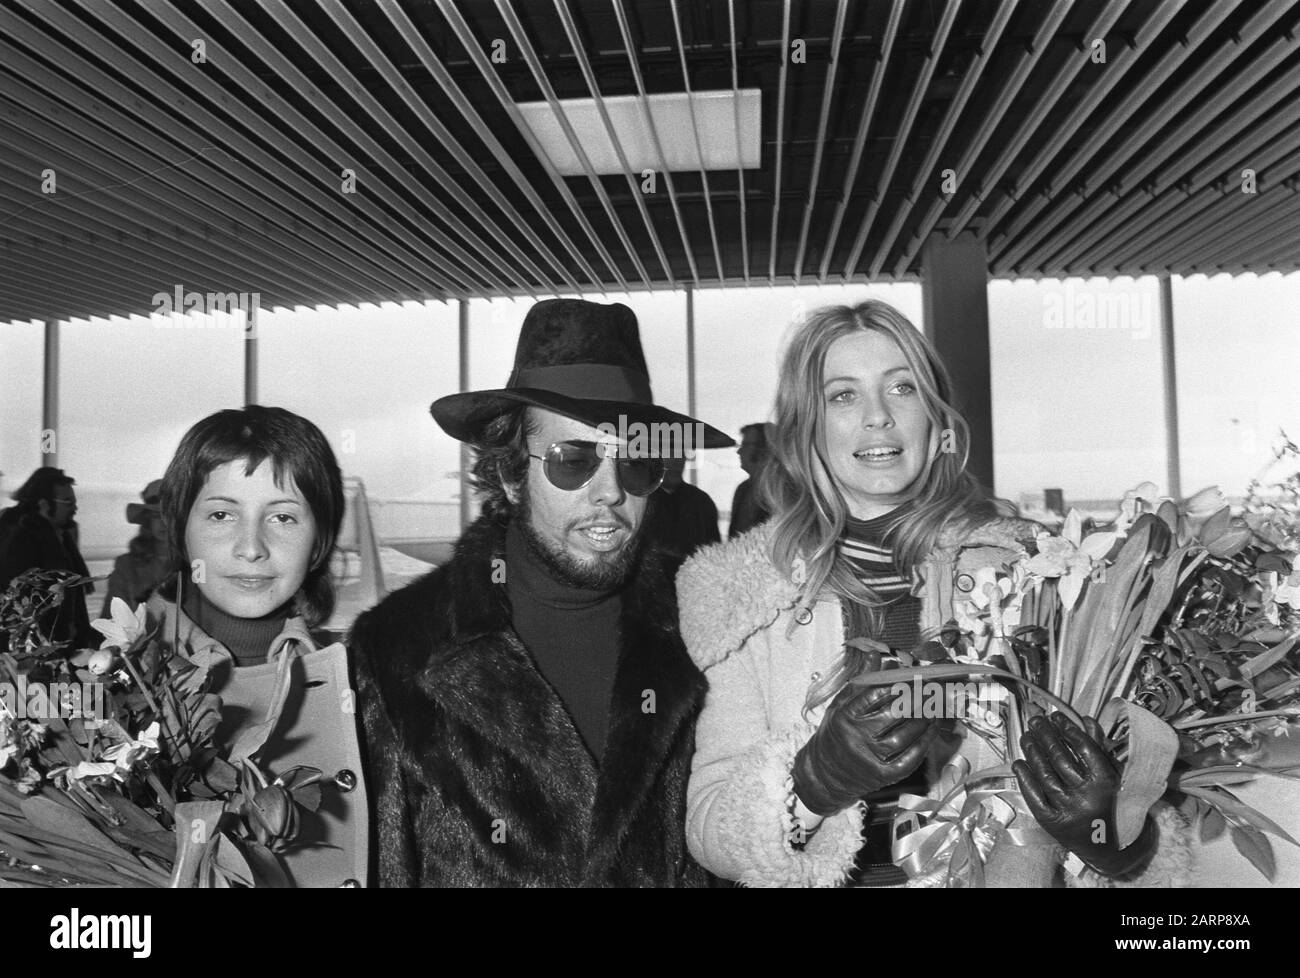 Arrival of Brazilian musician Sergio Mendes and his group on  From l.n.r. Gracinha Leporace (wife of Mendes), Sergio Mendes and Karen Philip Date: 5 March 1971 Location: Noord-Holland, Schiphol Keywords: arrivals, musicians, airports, singers Personal name: Leporace, Gracinha, Mendes, Sergio, Philip, Karen Stock Photo